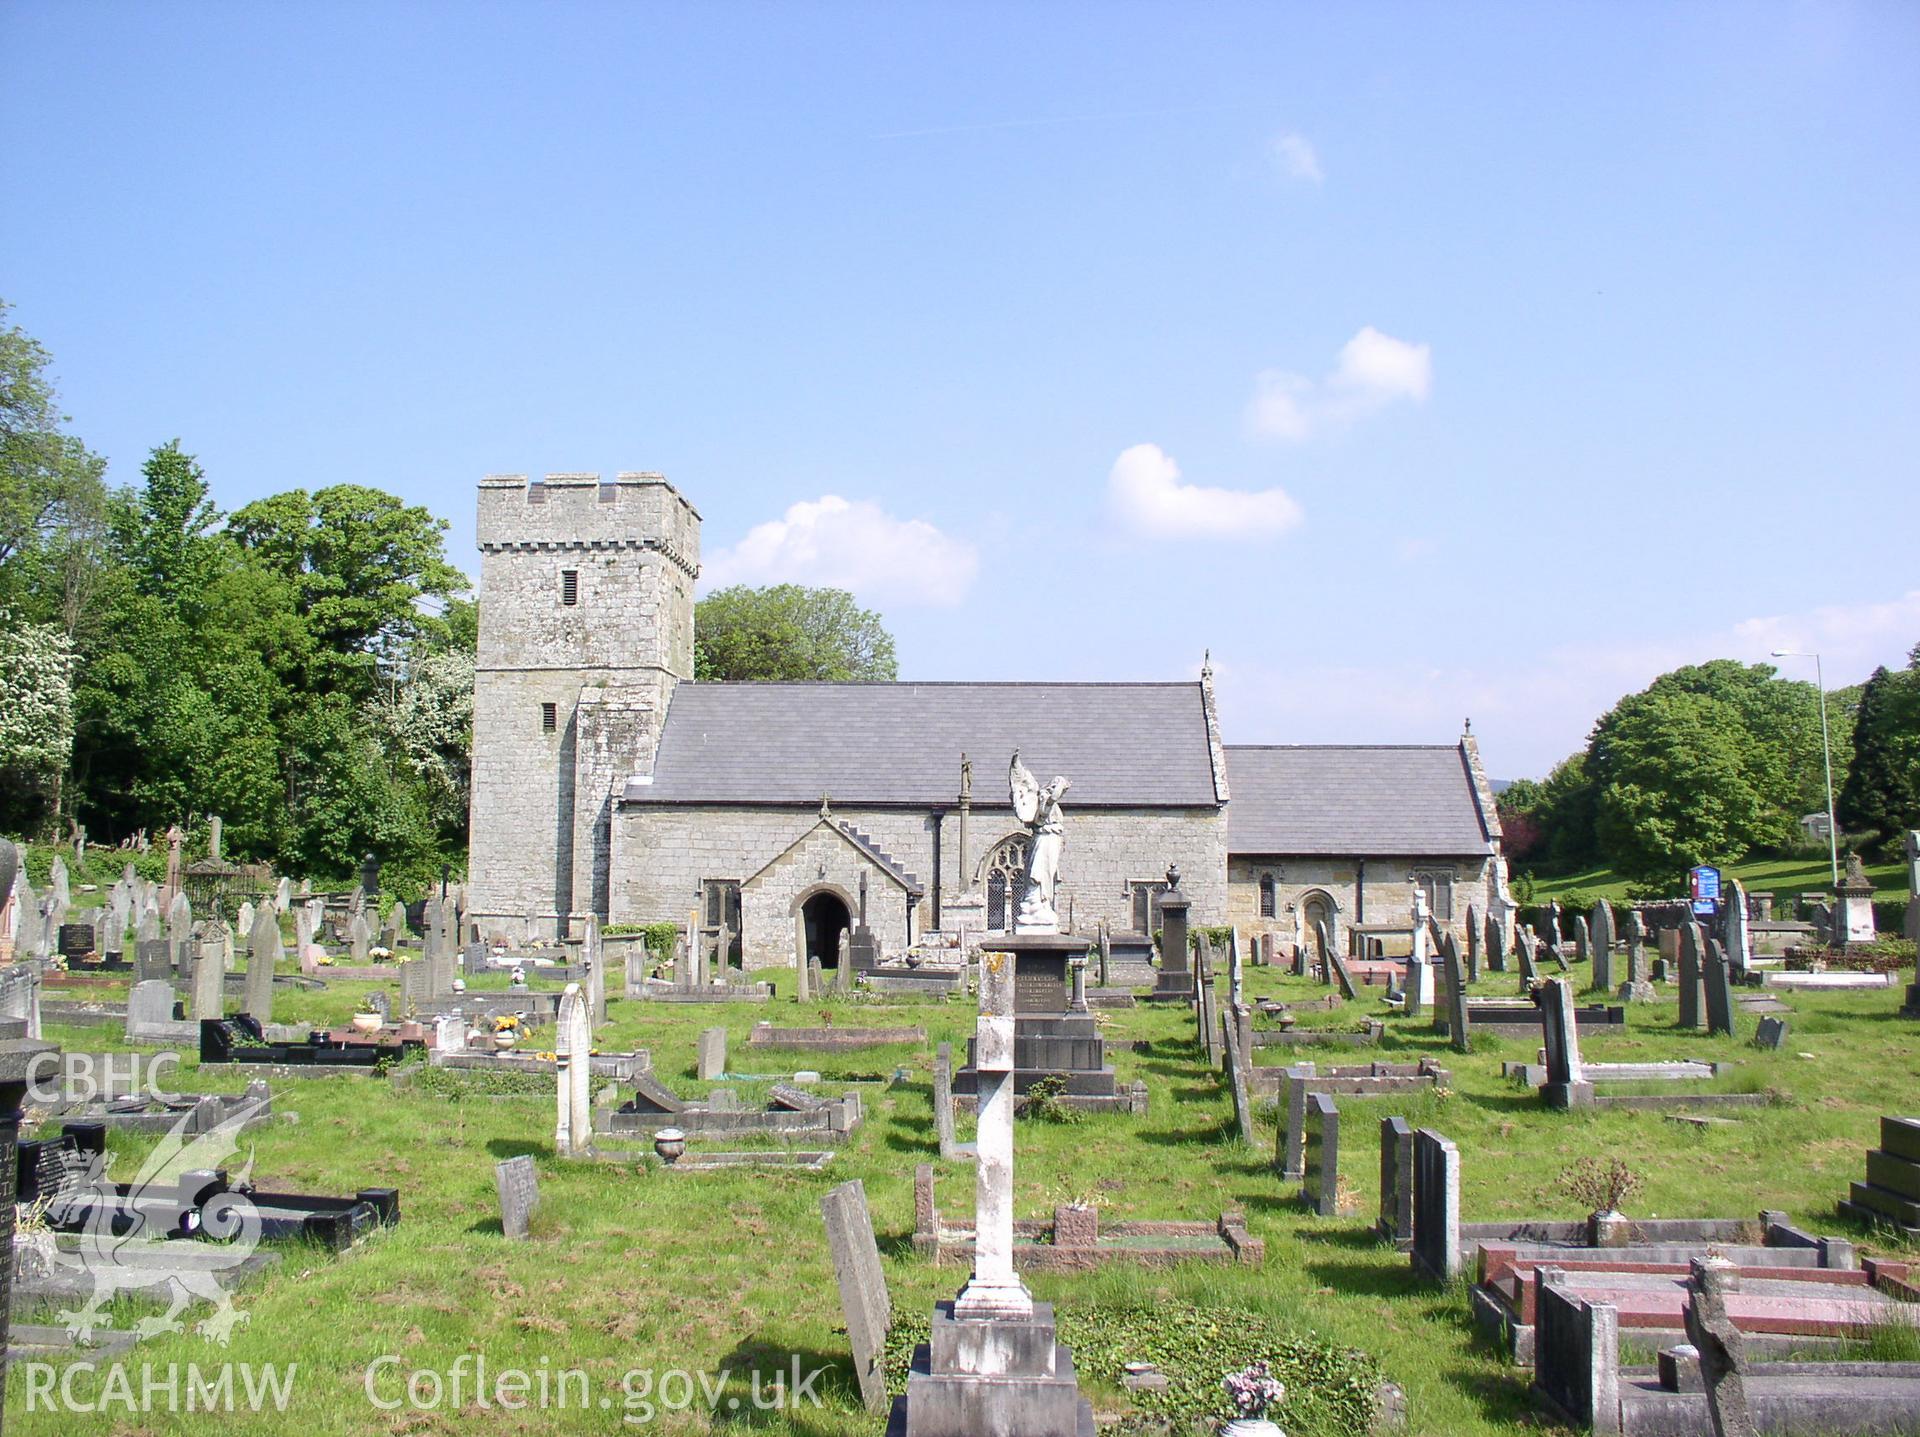 Colour digital photograph showing an elevation view of St James' Church, Pyle; Glamorgan.